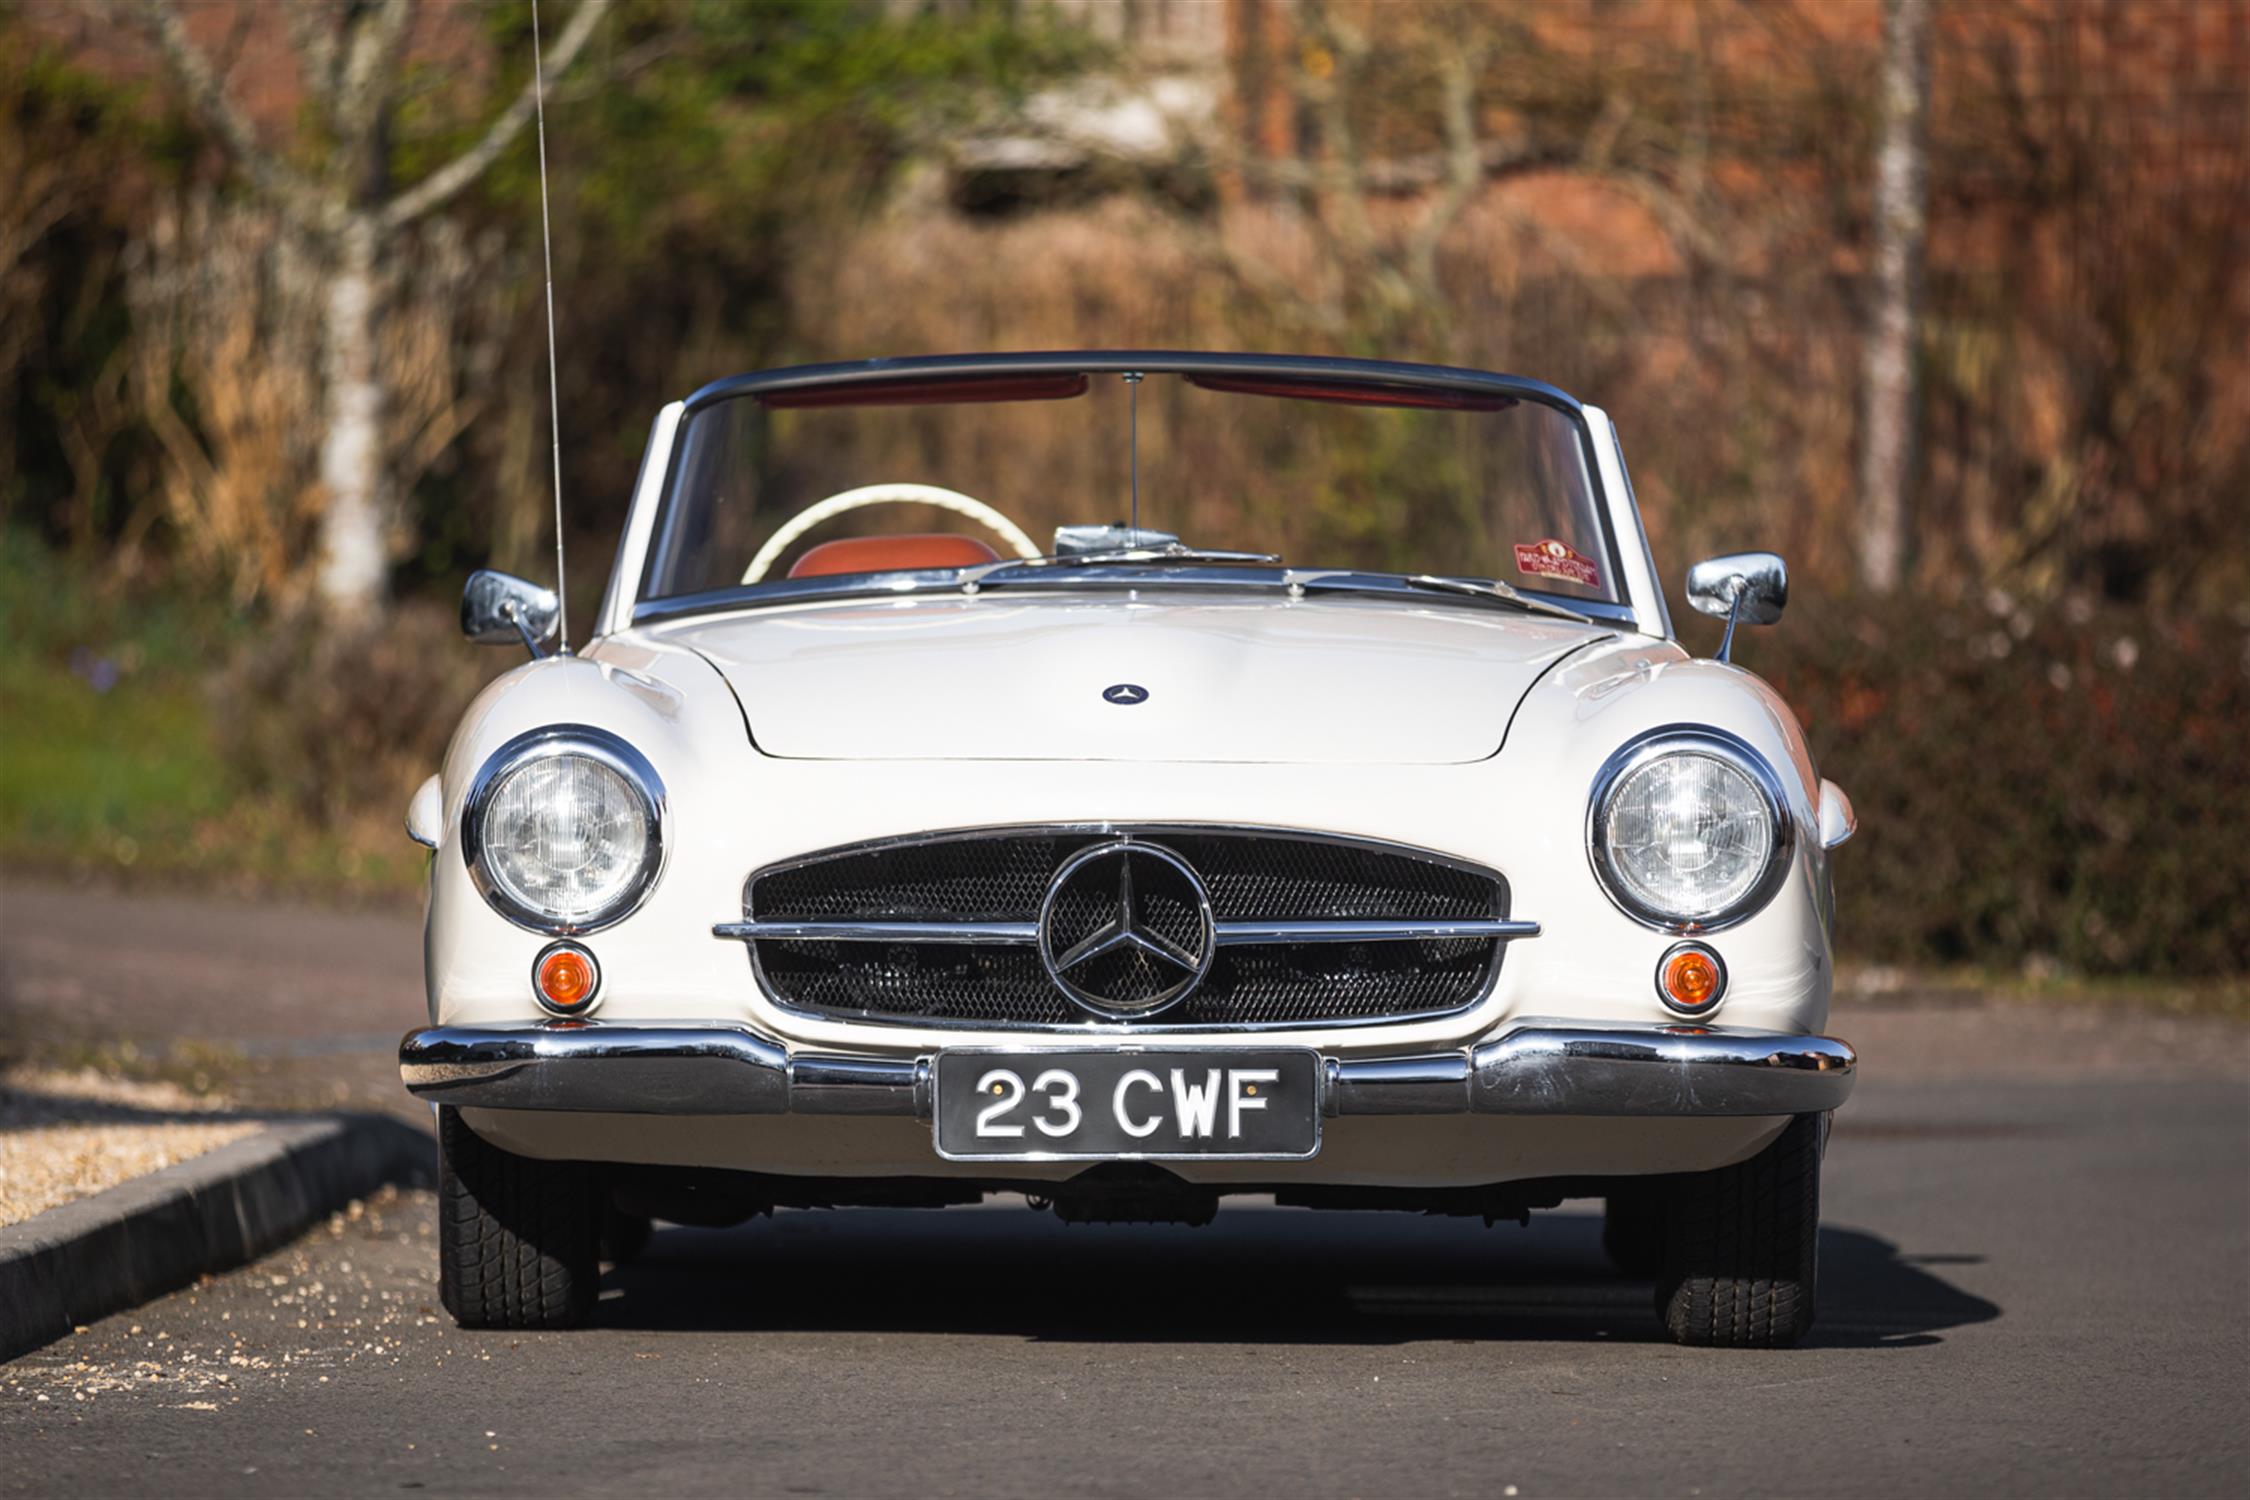 1962 Mercedes-Benz 190 SL with Hardtop - Right-Hand Drive - Image 15 of 19